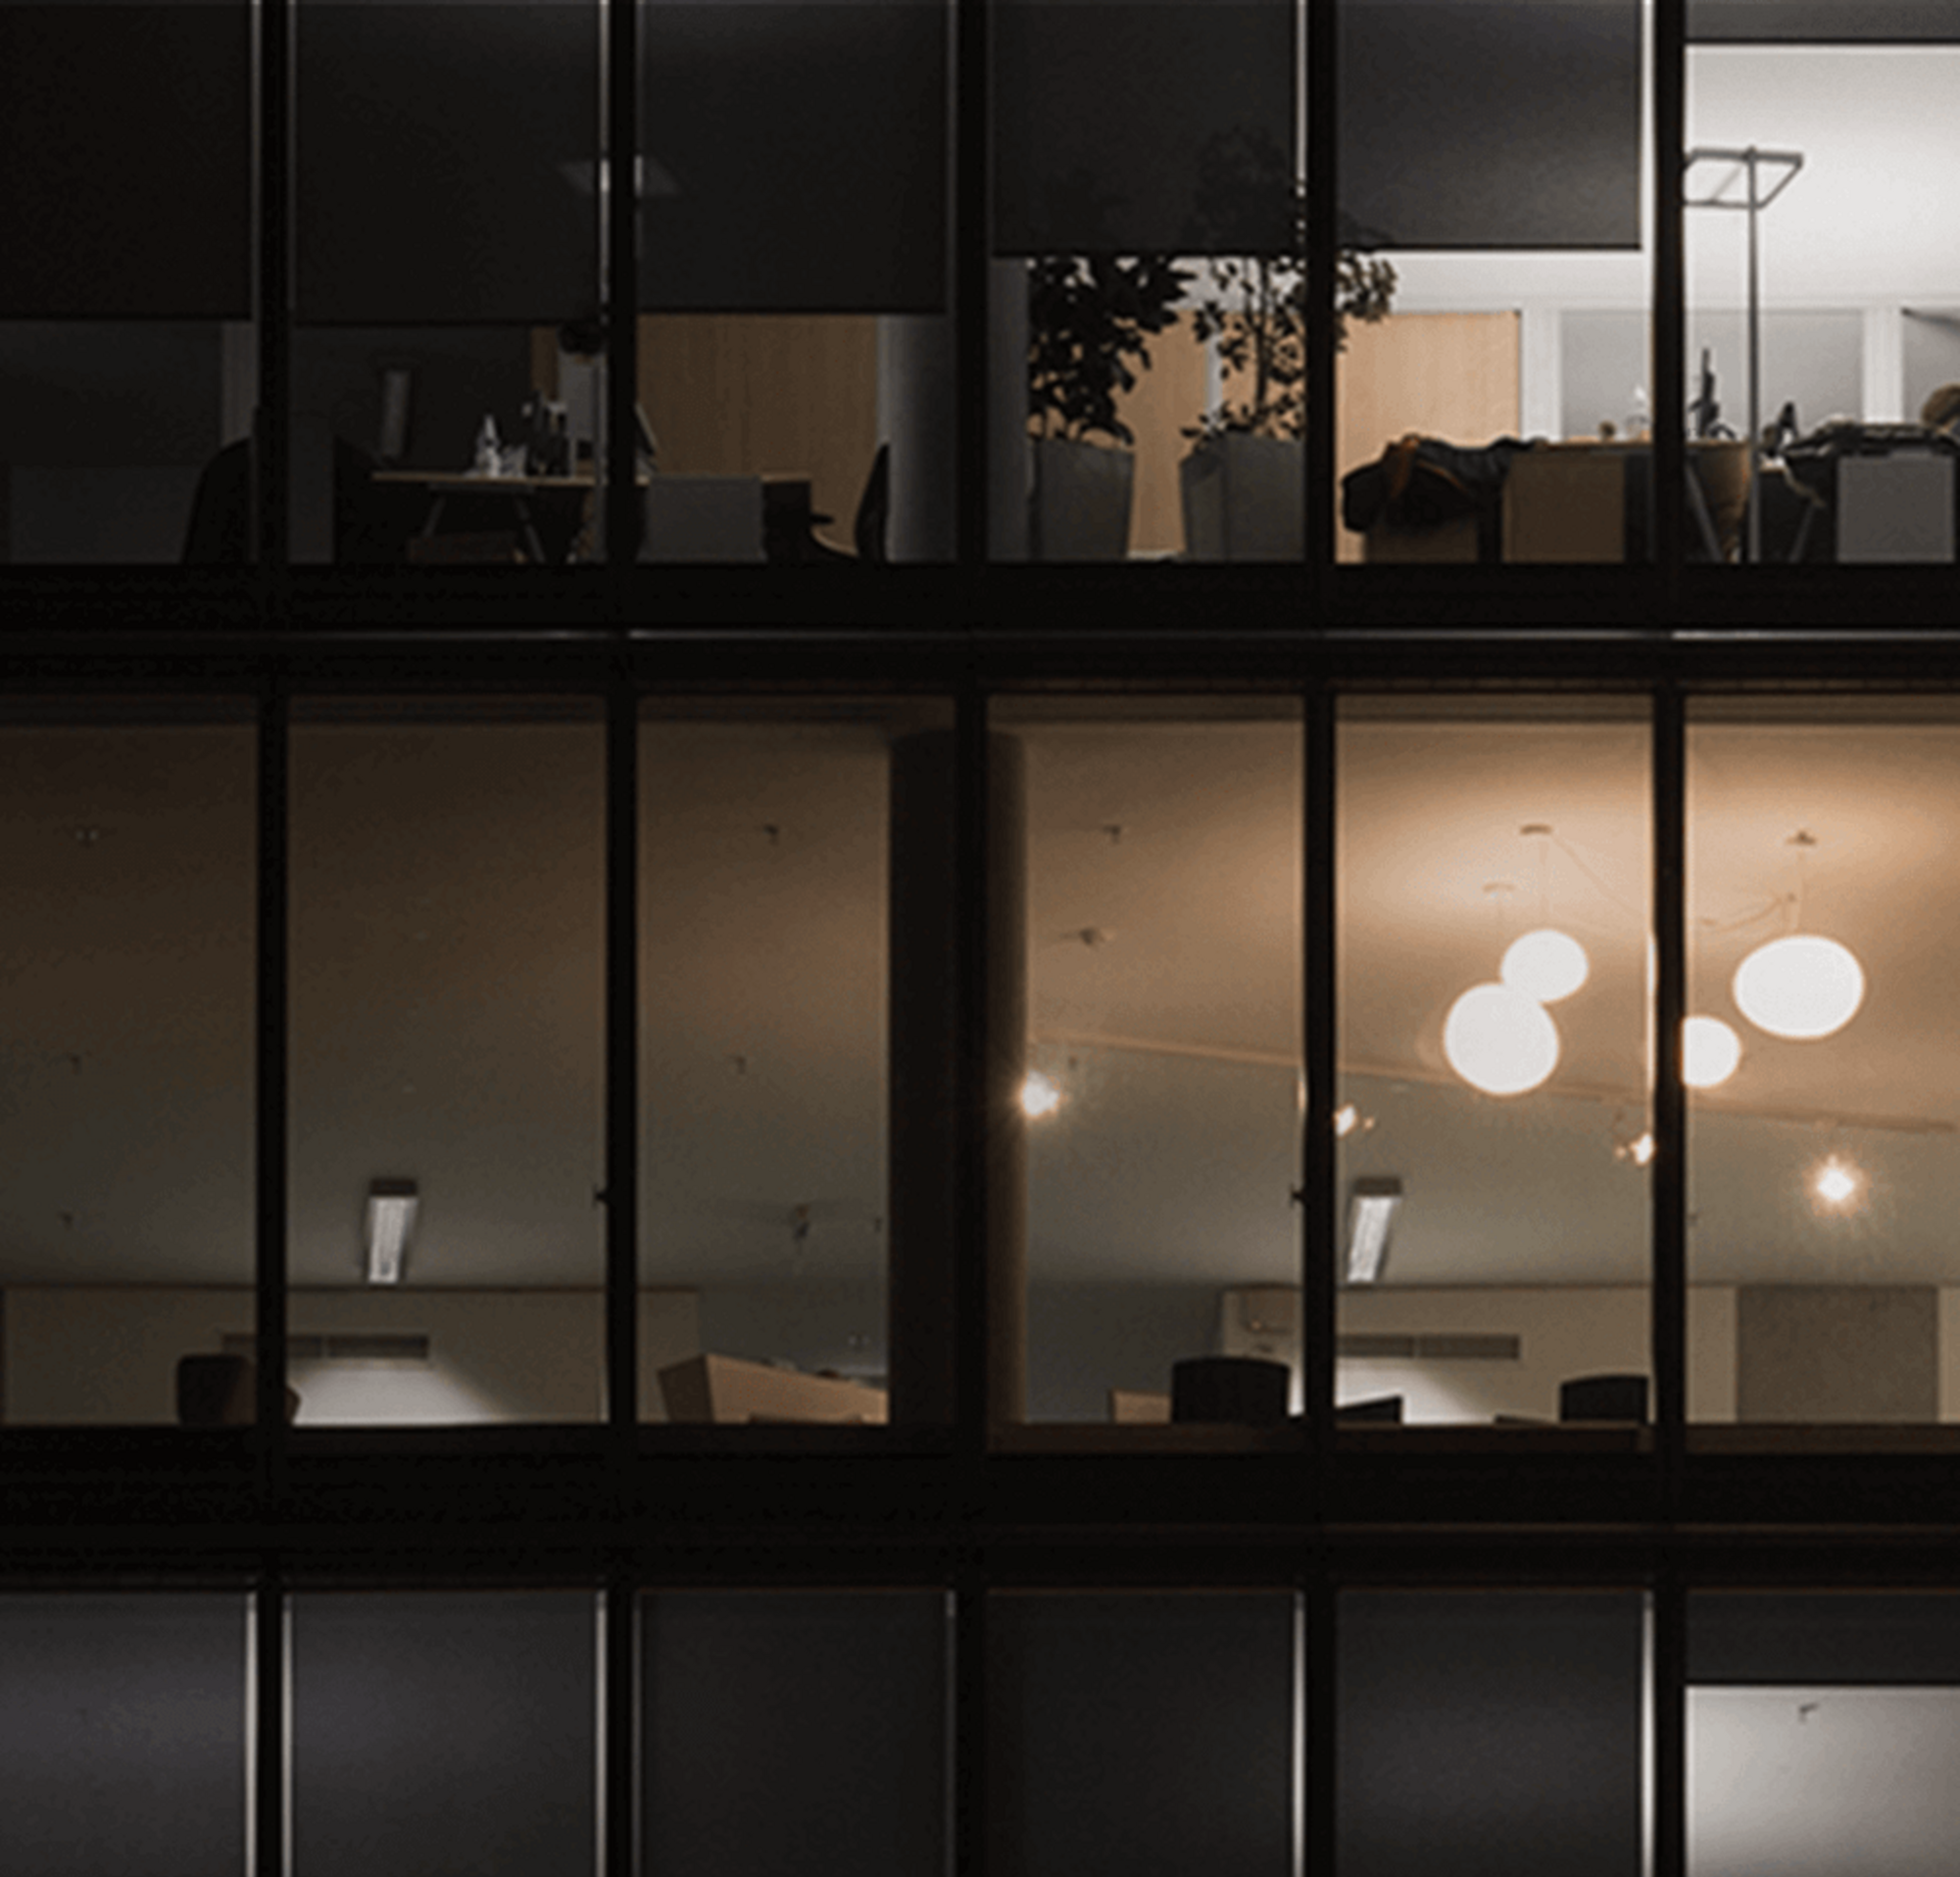 An image of three mostly dark floors in a multi-story office building at night.